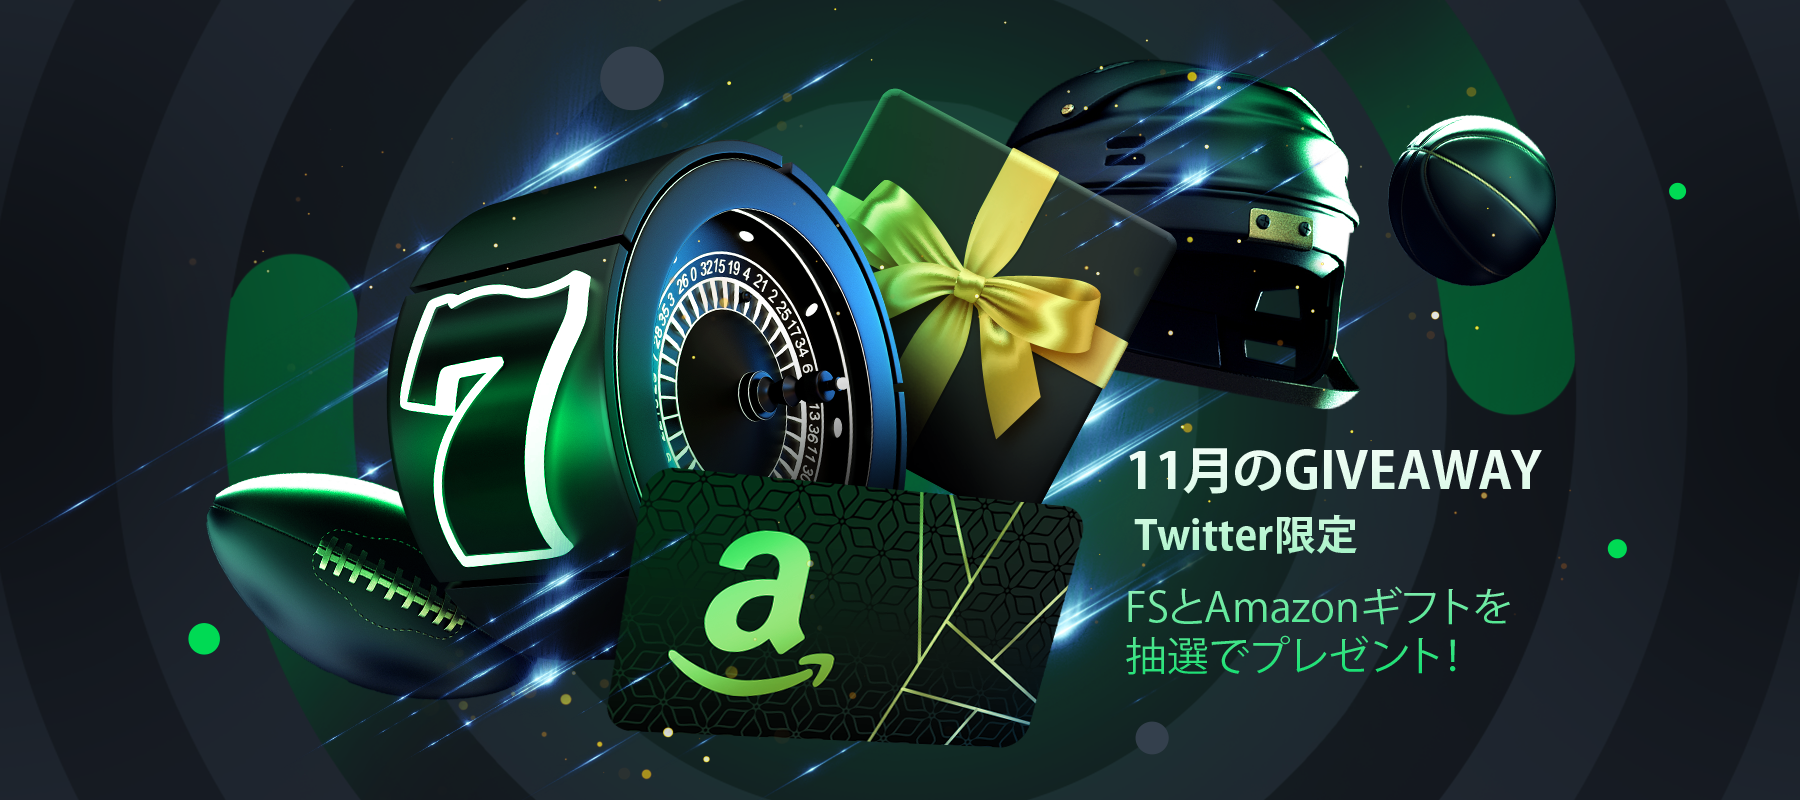 Twitter限定の11月GIVEAWAY